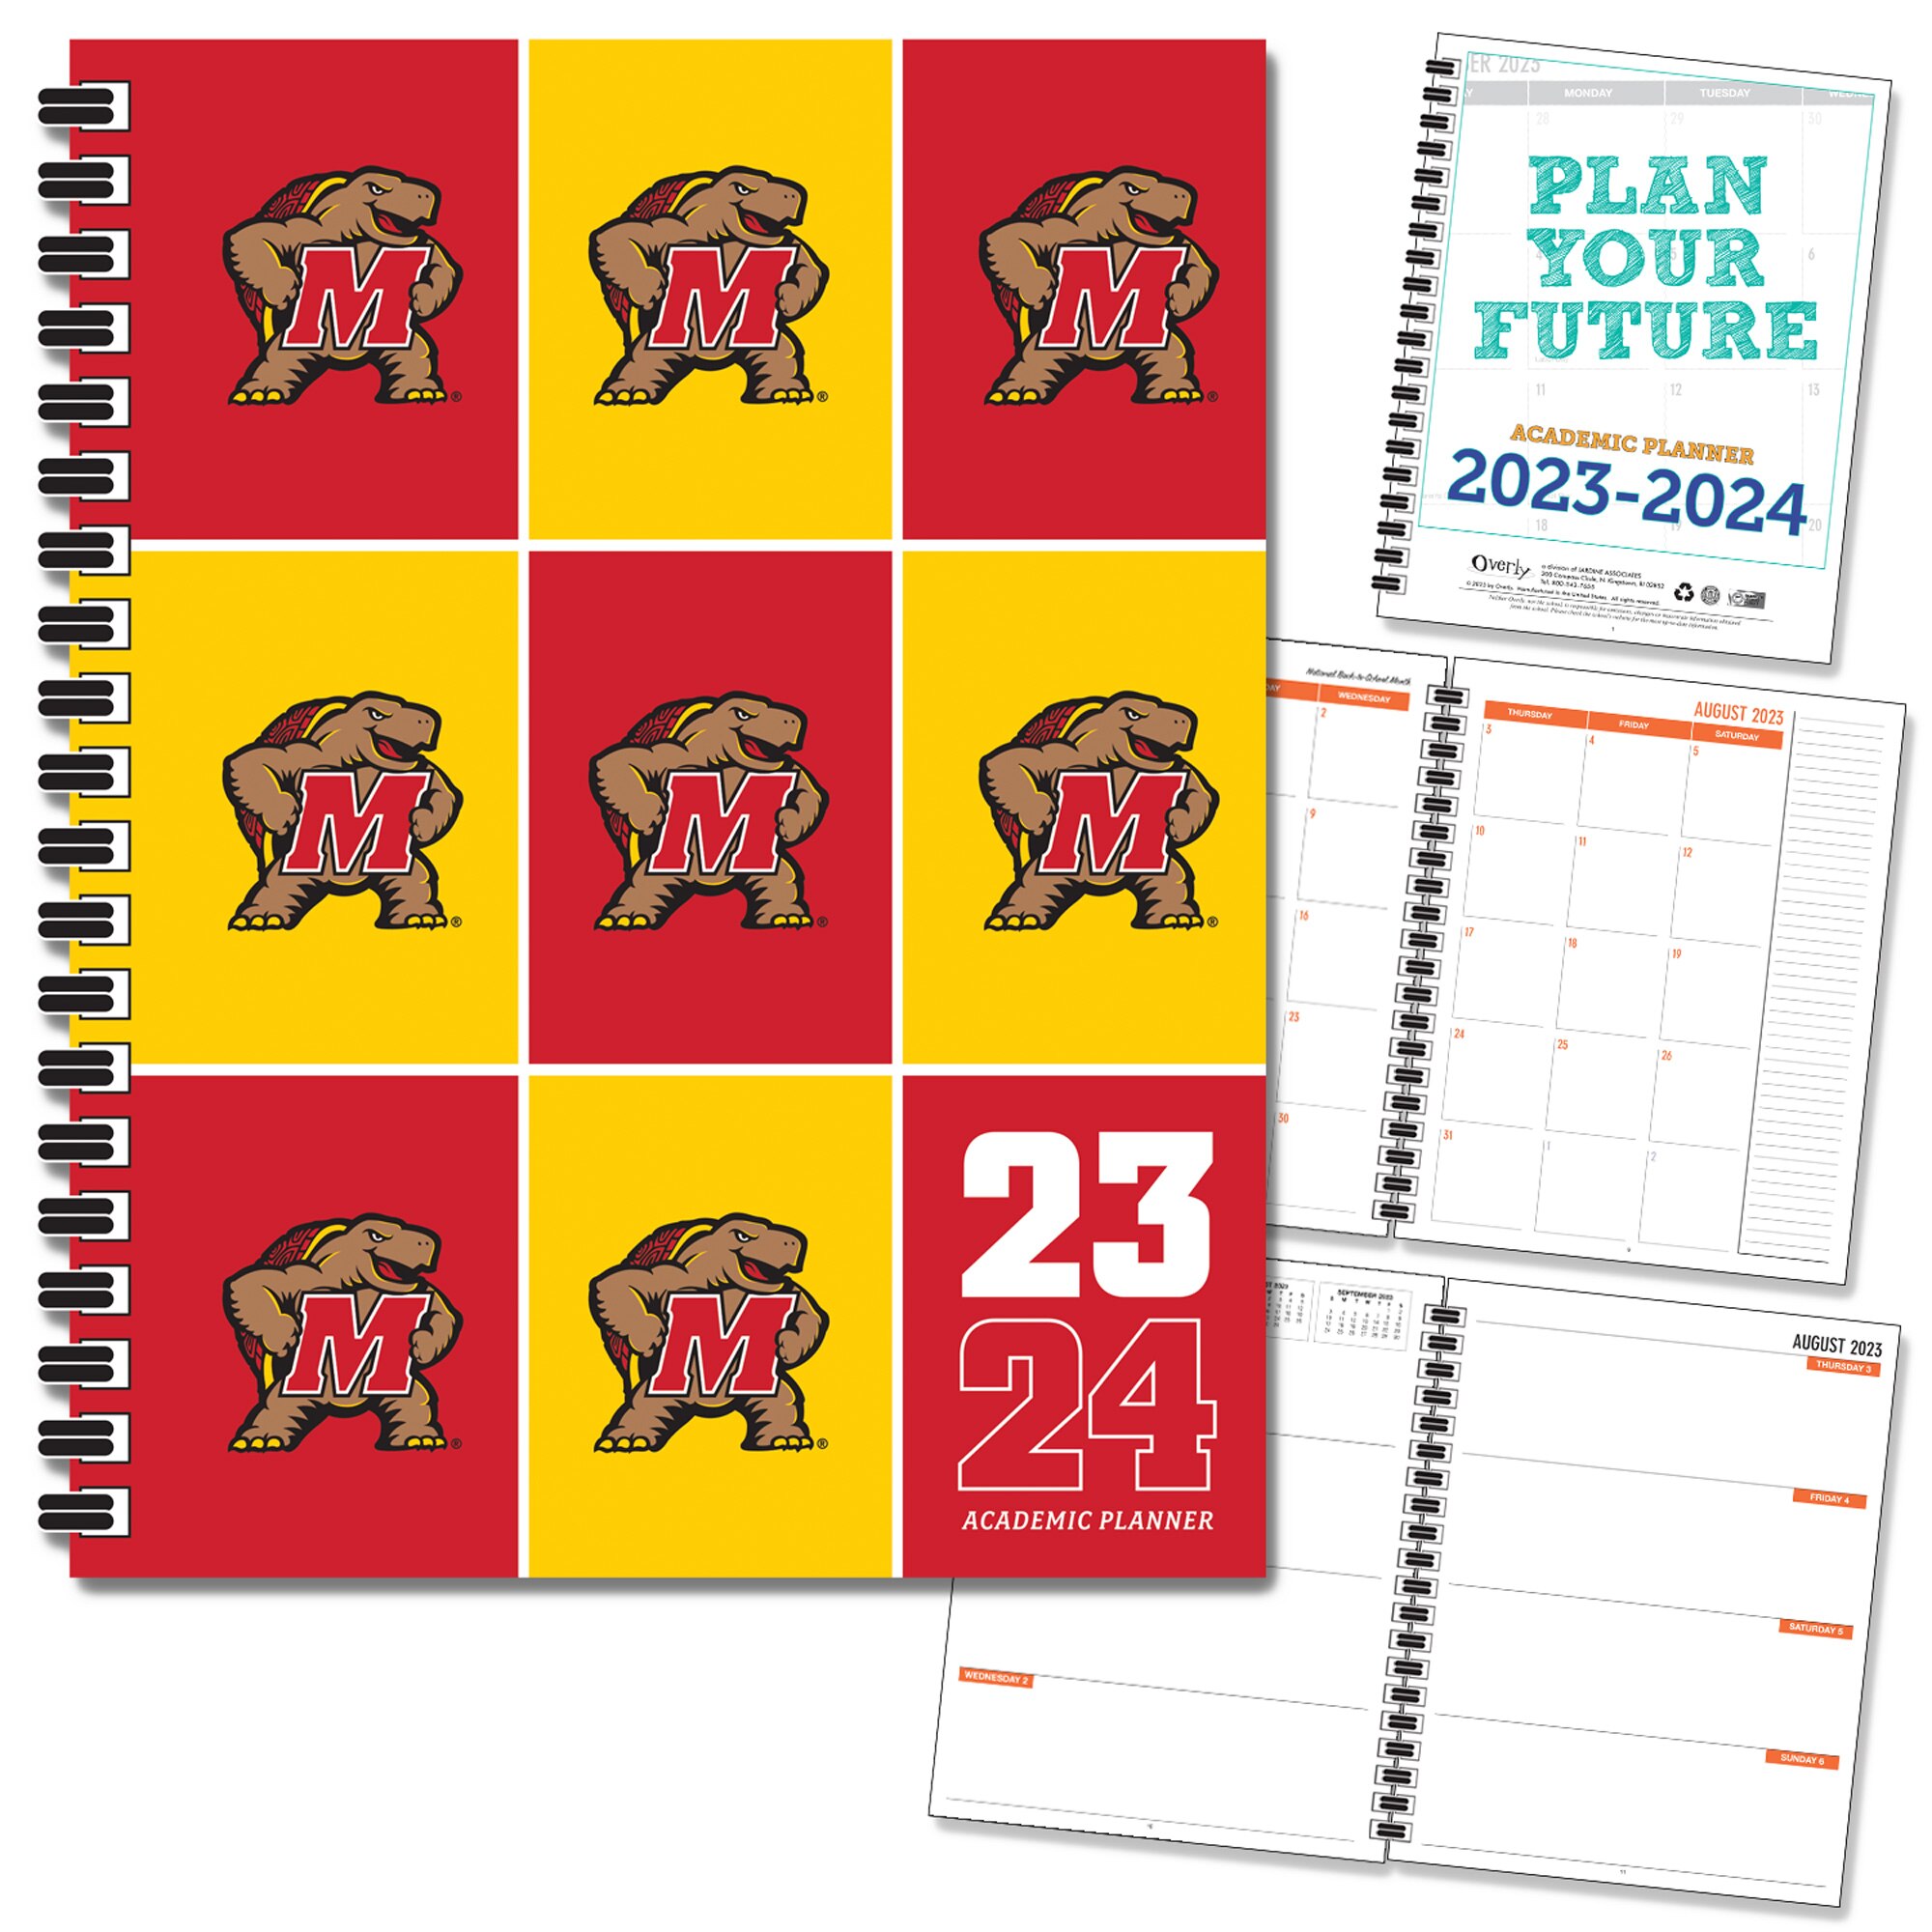 FY 24 Traditional Soft Touch Spot Varnish - Mascot Imprinted Planner 23-24 AY 7x9